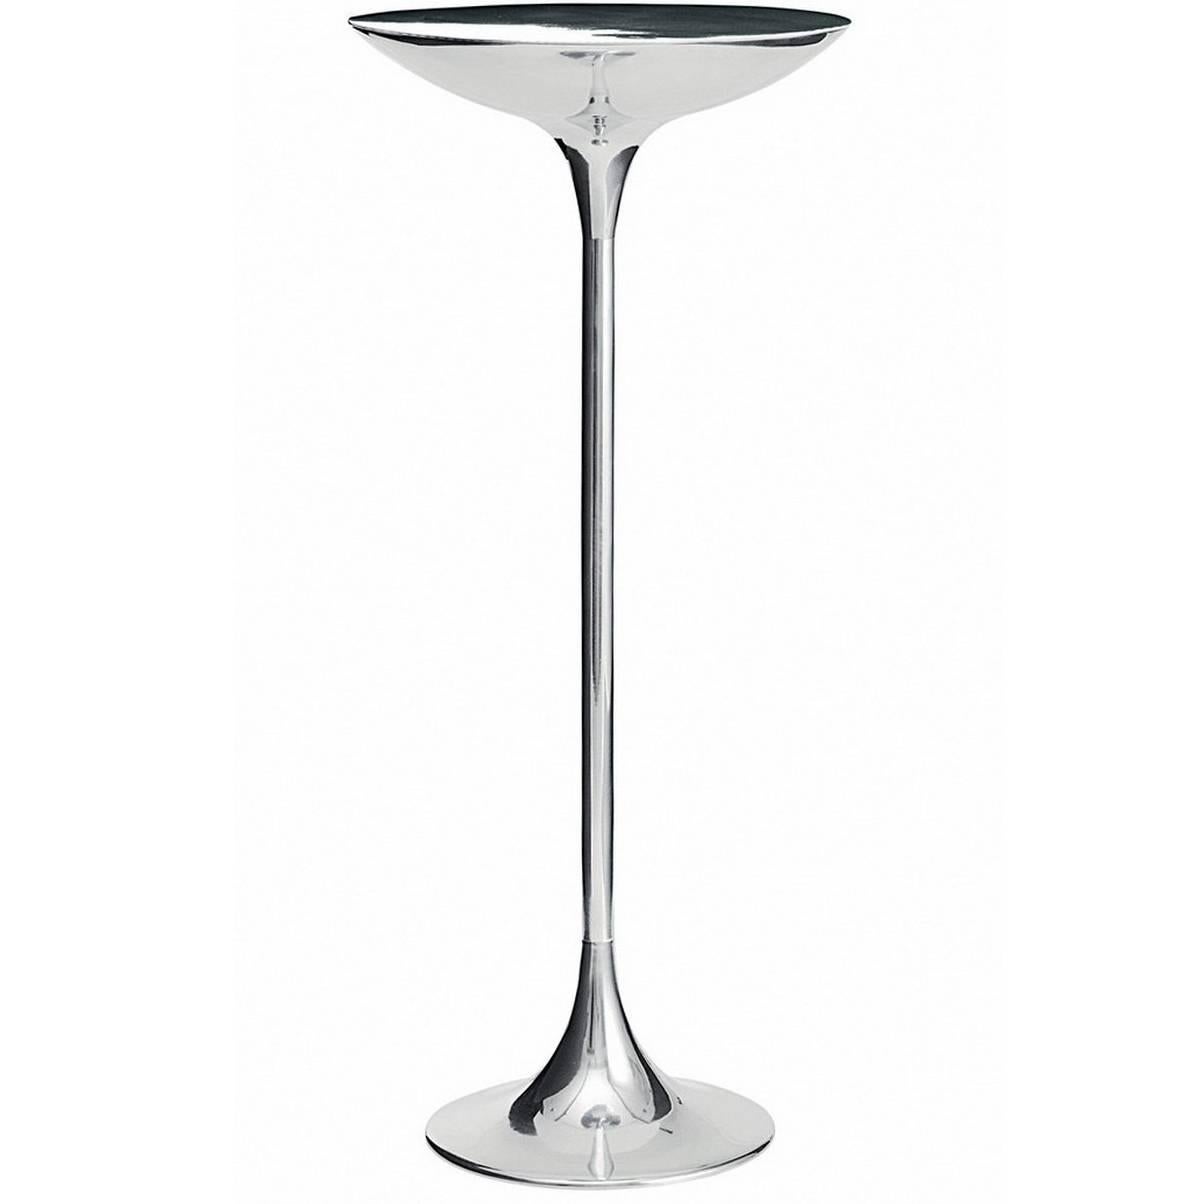 "Ping II" Polished Aluminum Small Table by Giuseppe Chigiotti for Driade For Sale